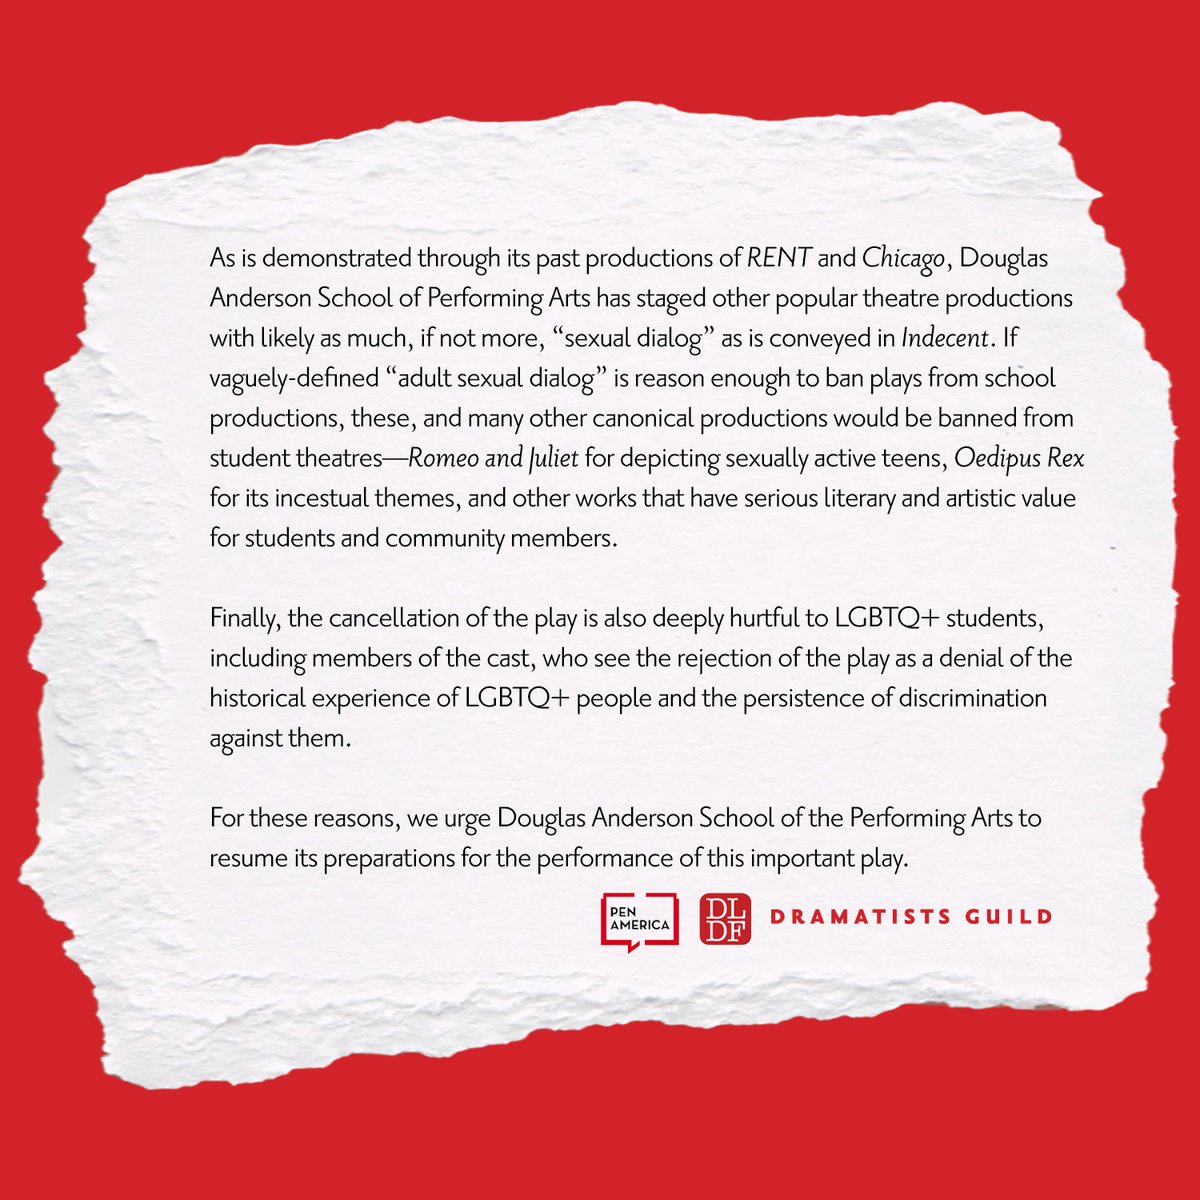 'As organizations dedicated to artistic, intellectual, and academic freedom, @ncacensorship, @penamerica, and @thedldf are deeply troubled by the cancellation of 'Indecent.' We urge school officials to rescind their decision...' Read the full statement: dramatistsguild.com/news/joint-sta…